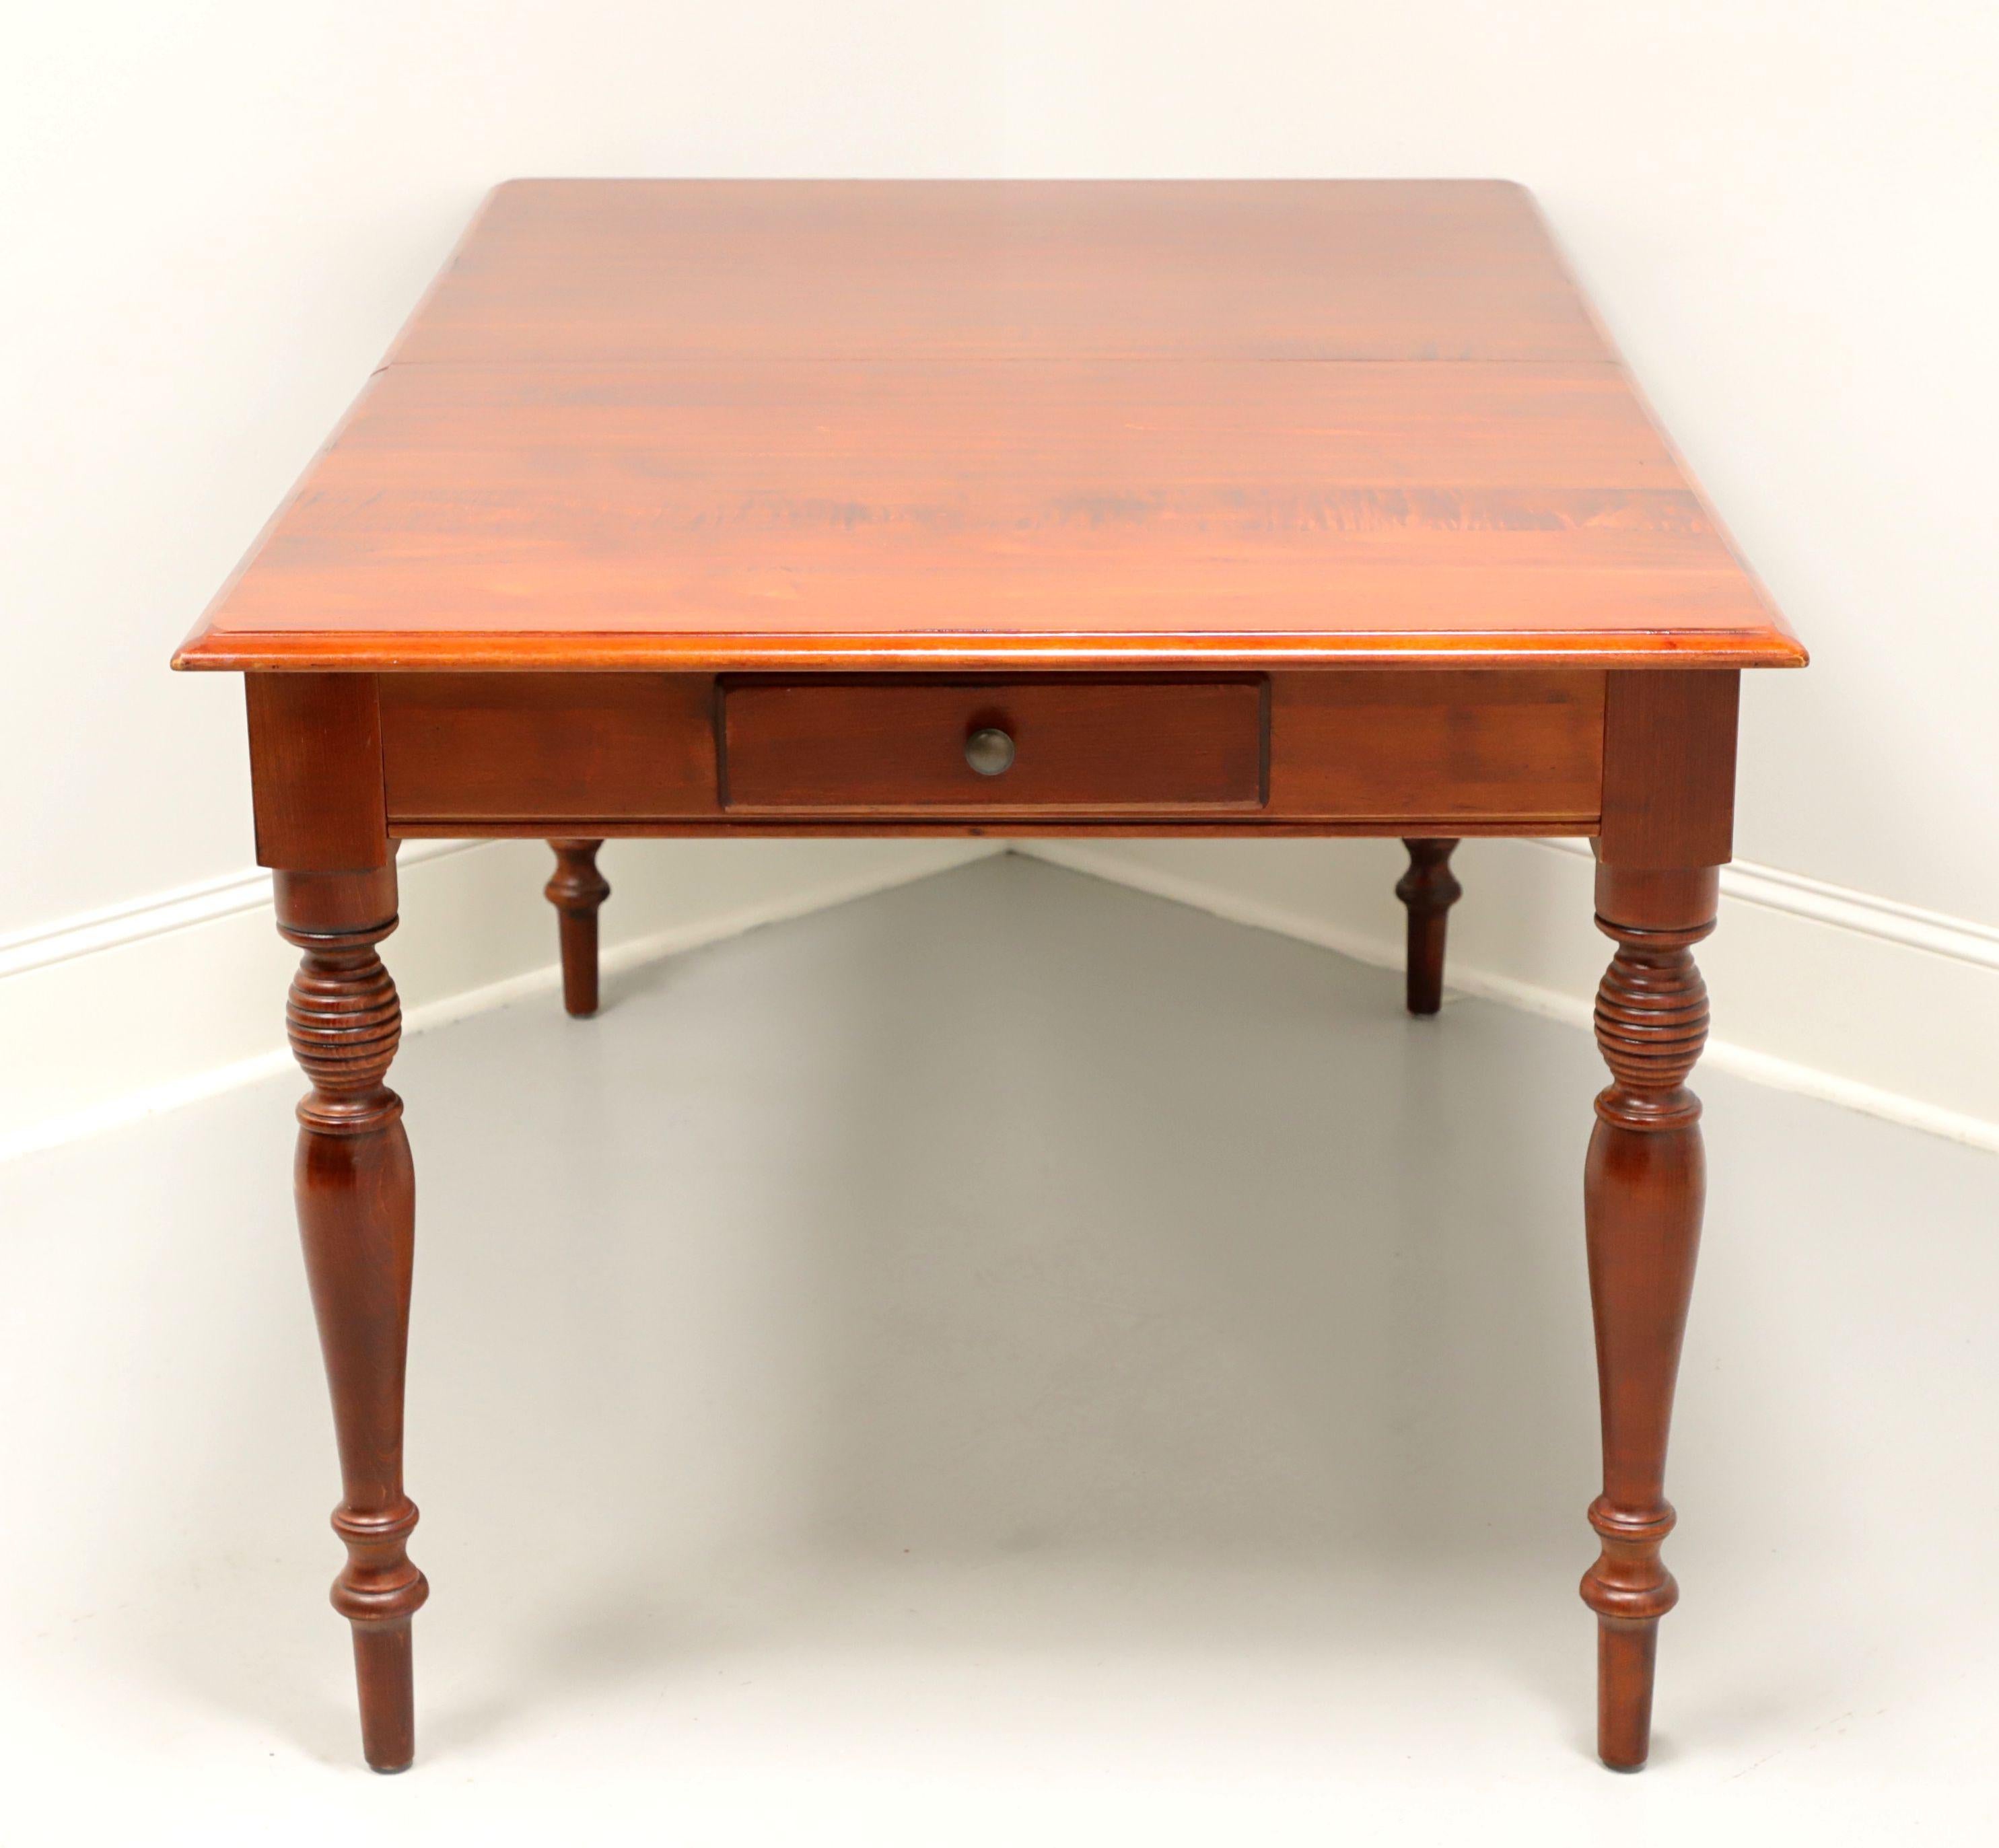 A Farmhouse style dining table by Pennsylvania House. Solid cherry with rectangular top, apron with one dovetail drawer at each narrow end and four turned legs. Includes two extension leaves for placement on metal expansion sliders. Made in the USA,